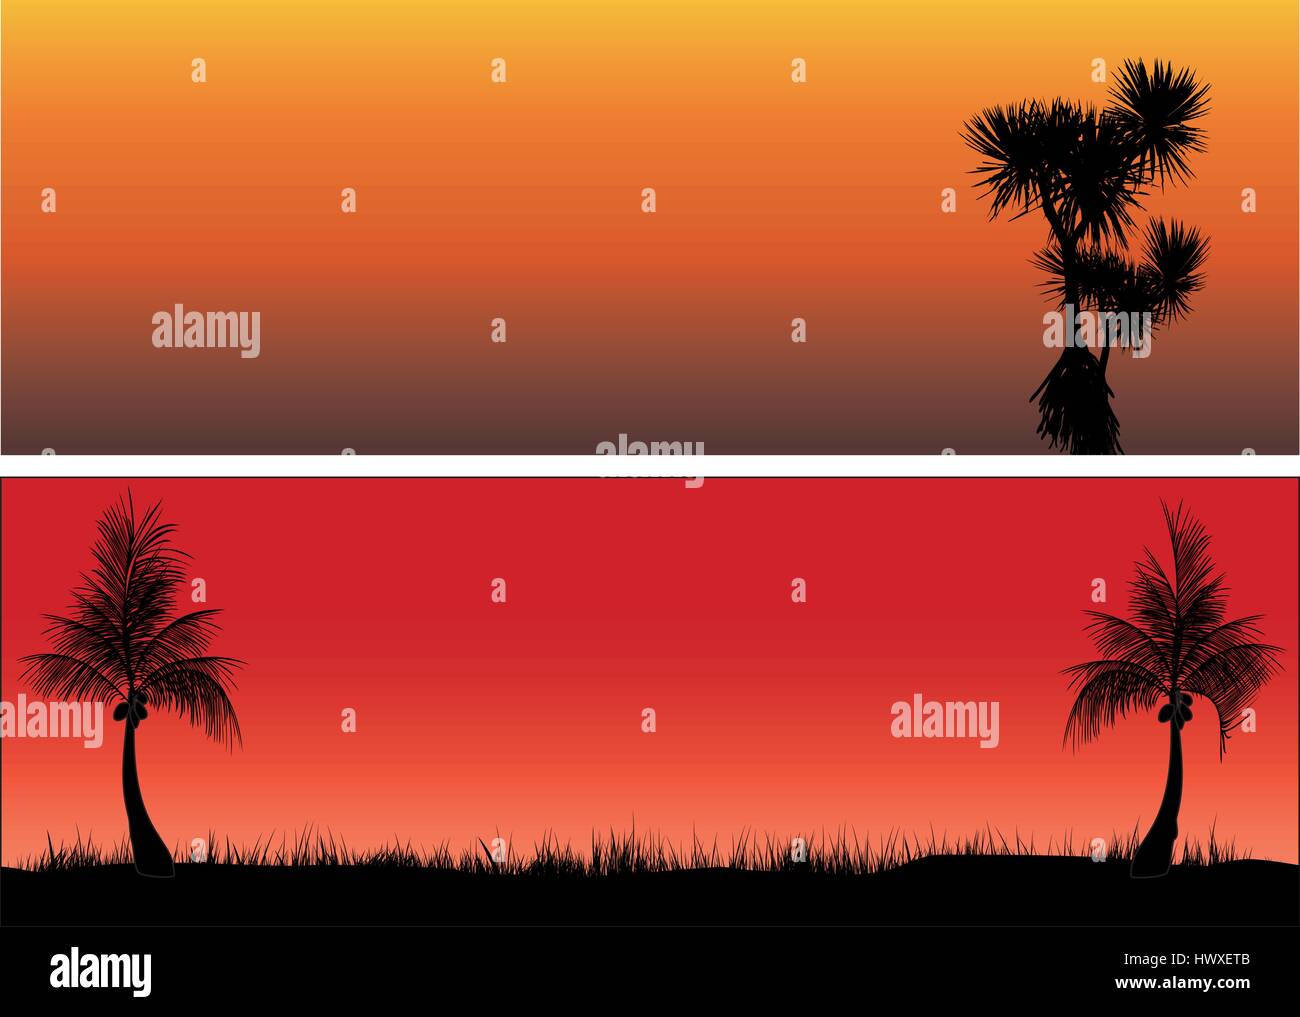 coconut trees and pandanas in the sunset Stock Vector